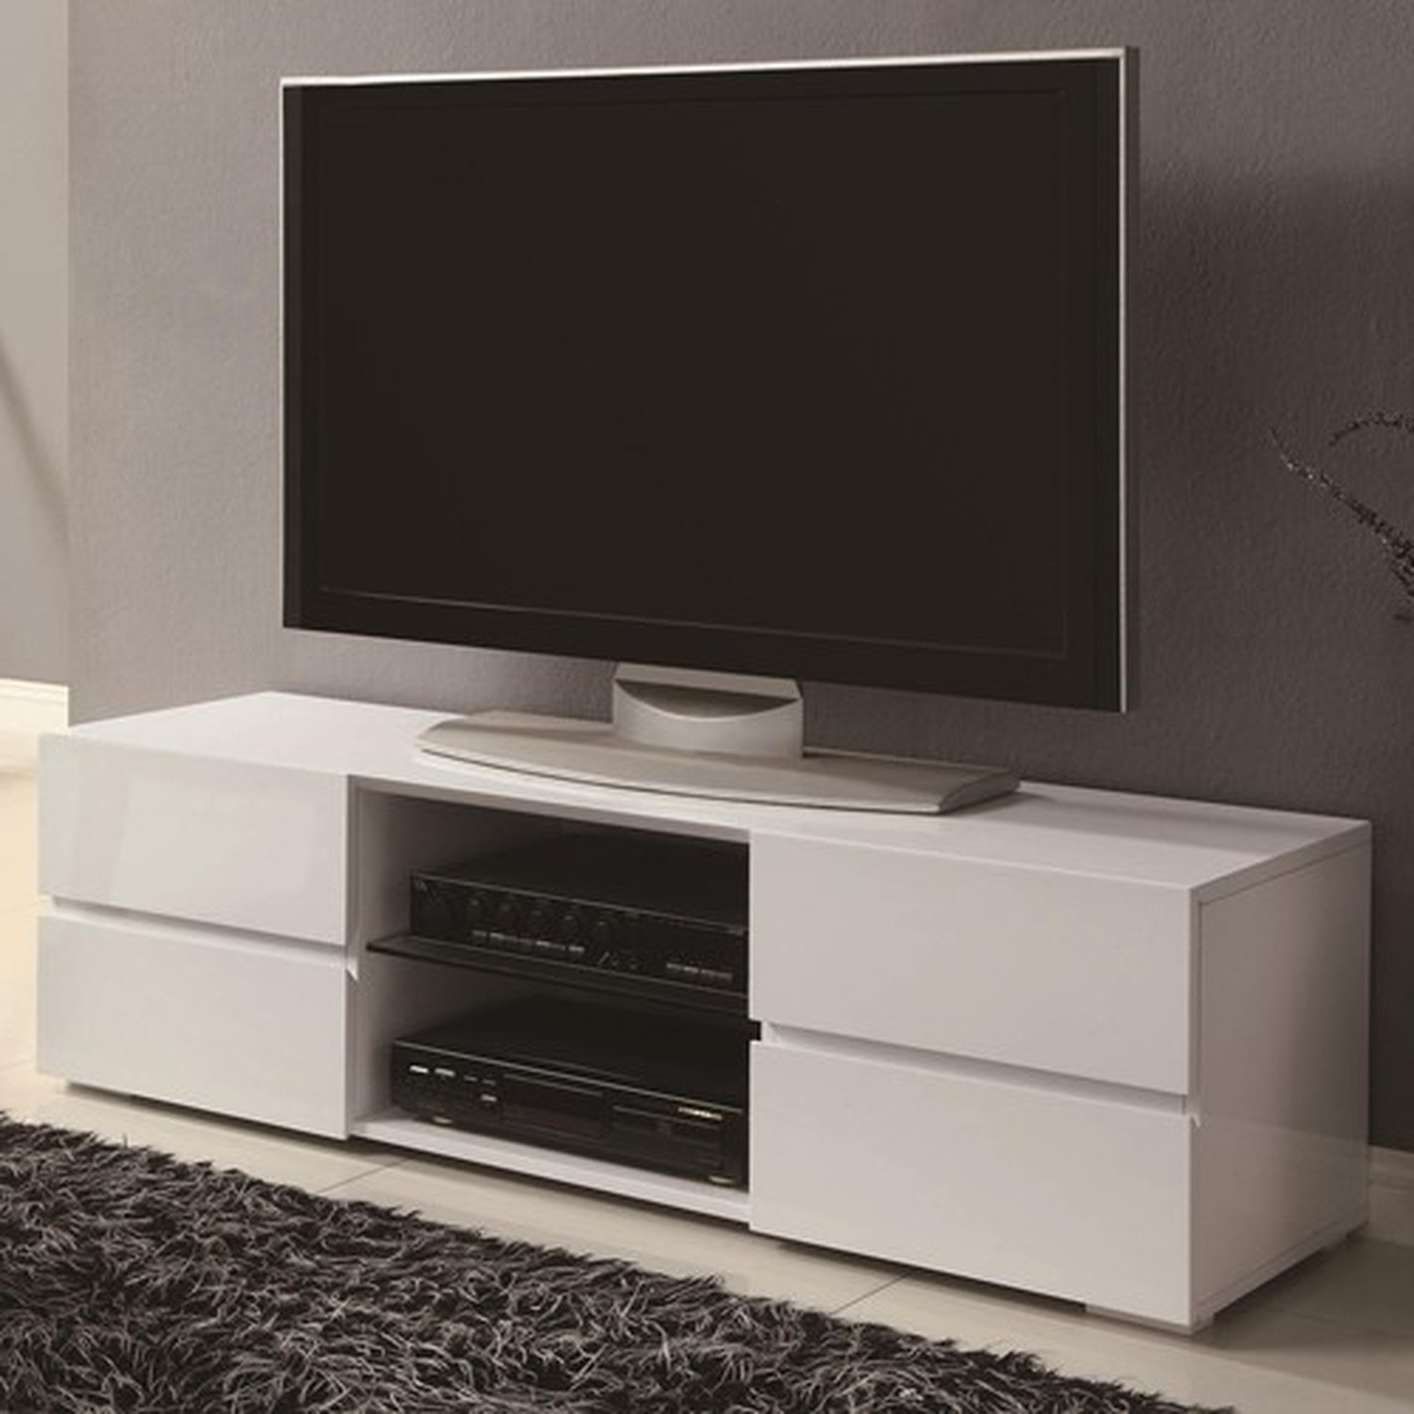 White Wood Tv Stand – Steal A Sofa Furniture Outlet Los Angeles Ca Pertaining To White And Wood Tv Stands (View 1 of 15)